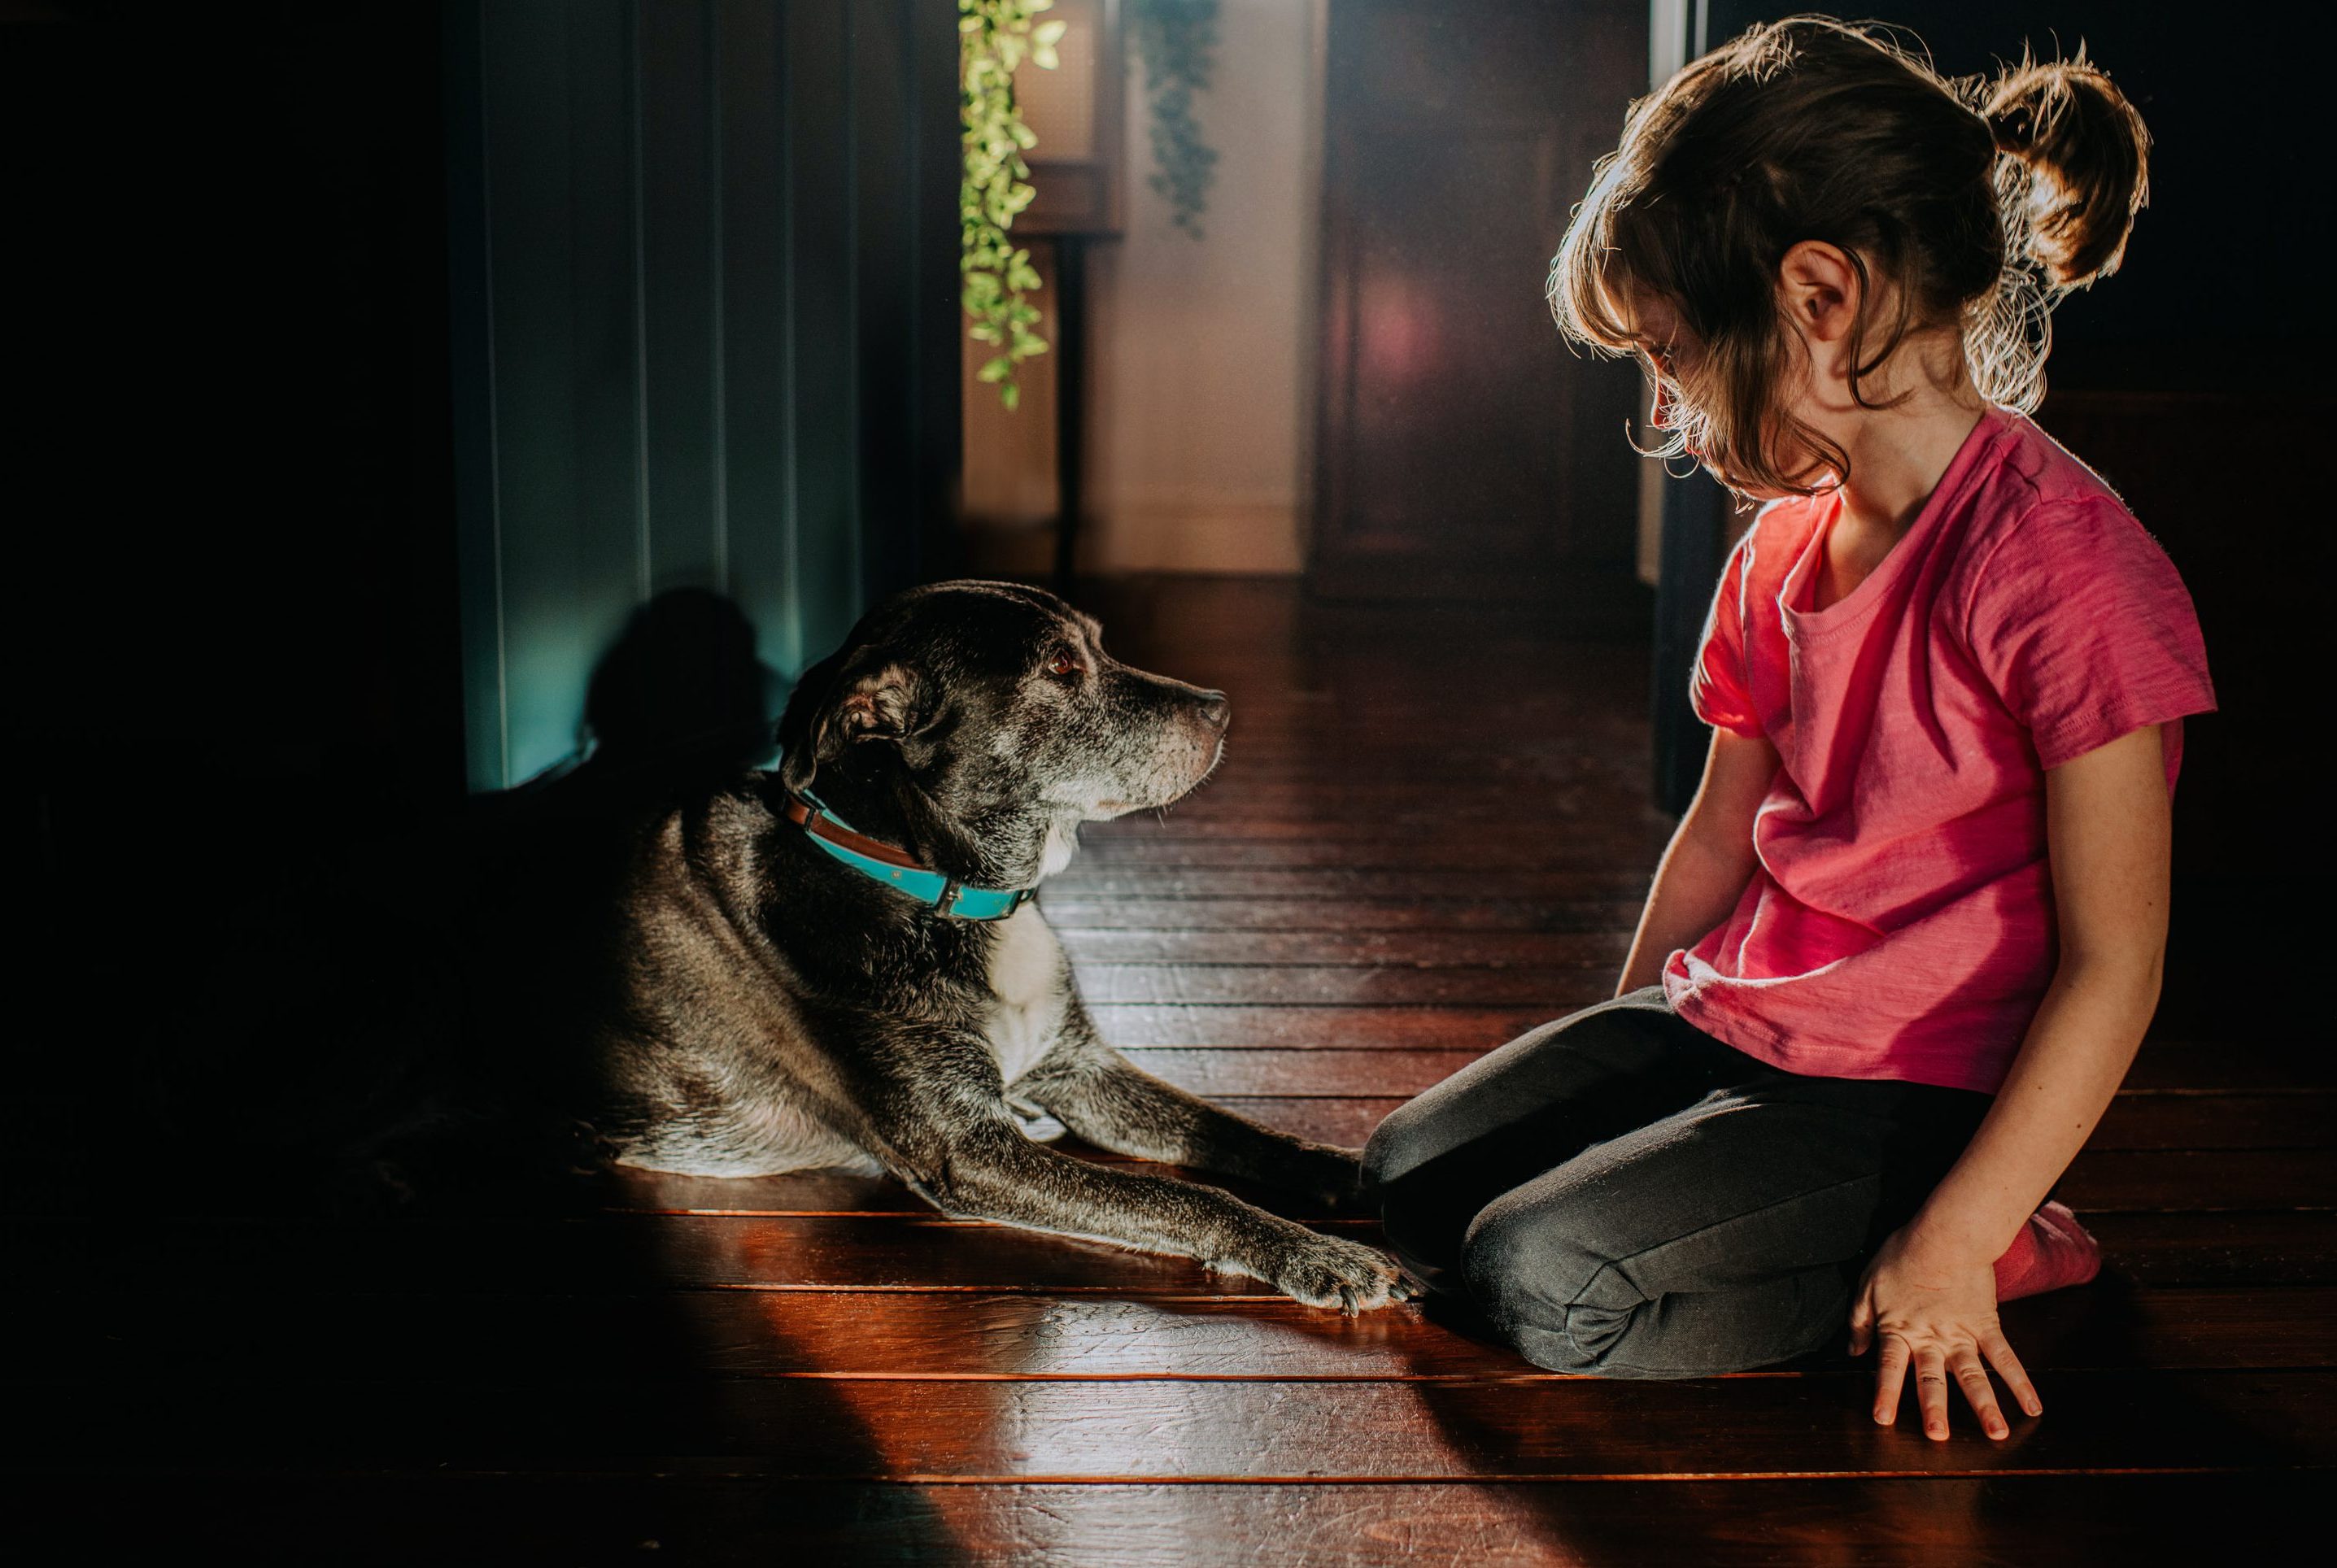 A calm image of a little girl sitting beside an old black dog in a domestic room. They look toward each other.